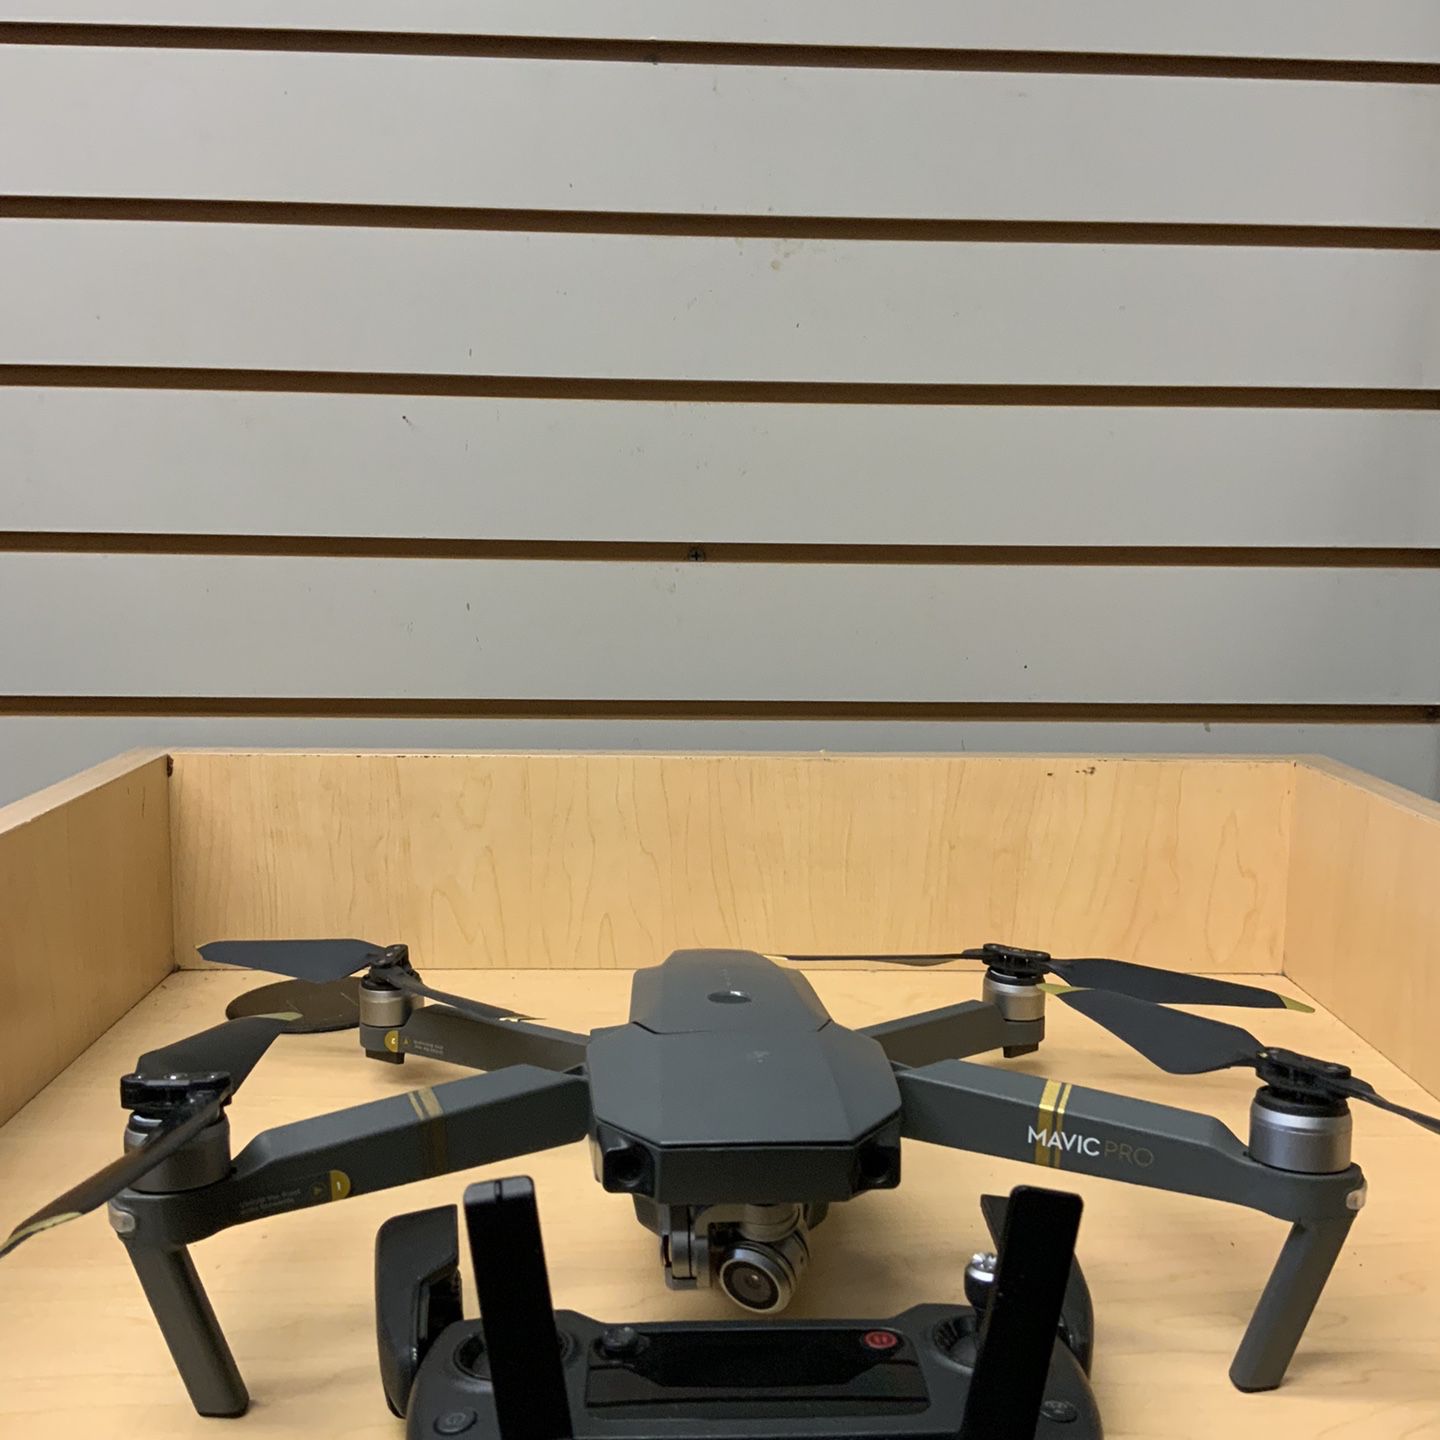 DJI Mavic Pro fly more with UHD 4K Camera & Full HD Video | 12MP | 3-Axis Gimbal - Bag Included